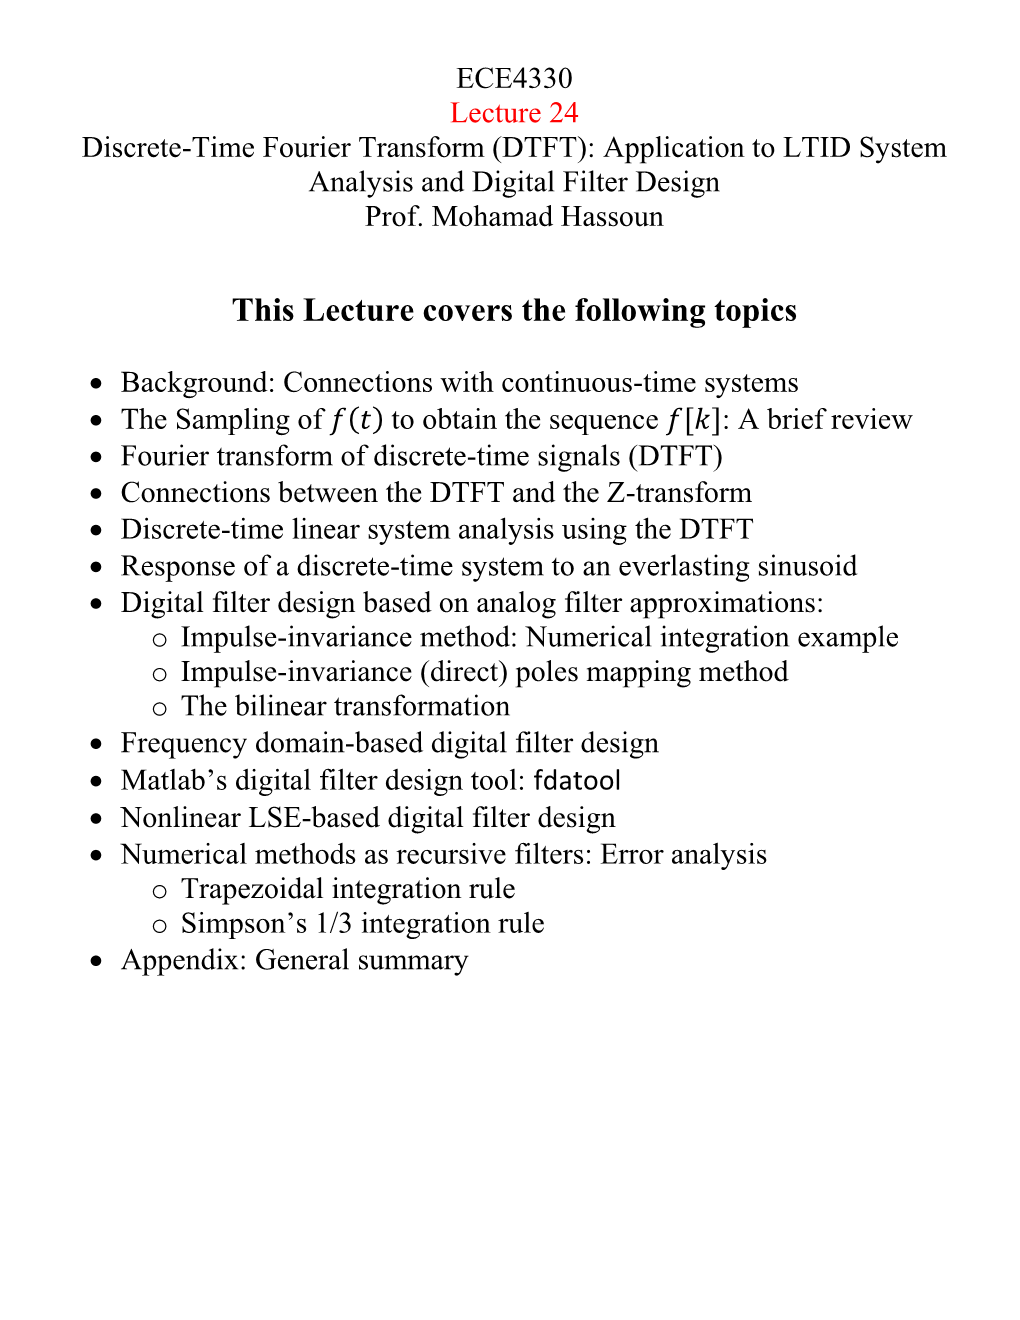 This Lecture Covers the Following Topics